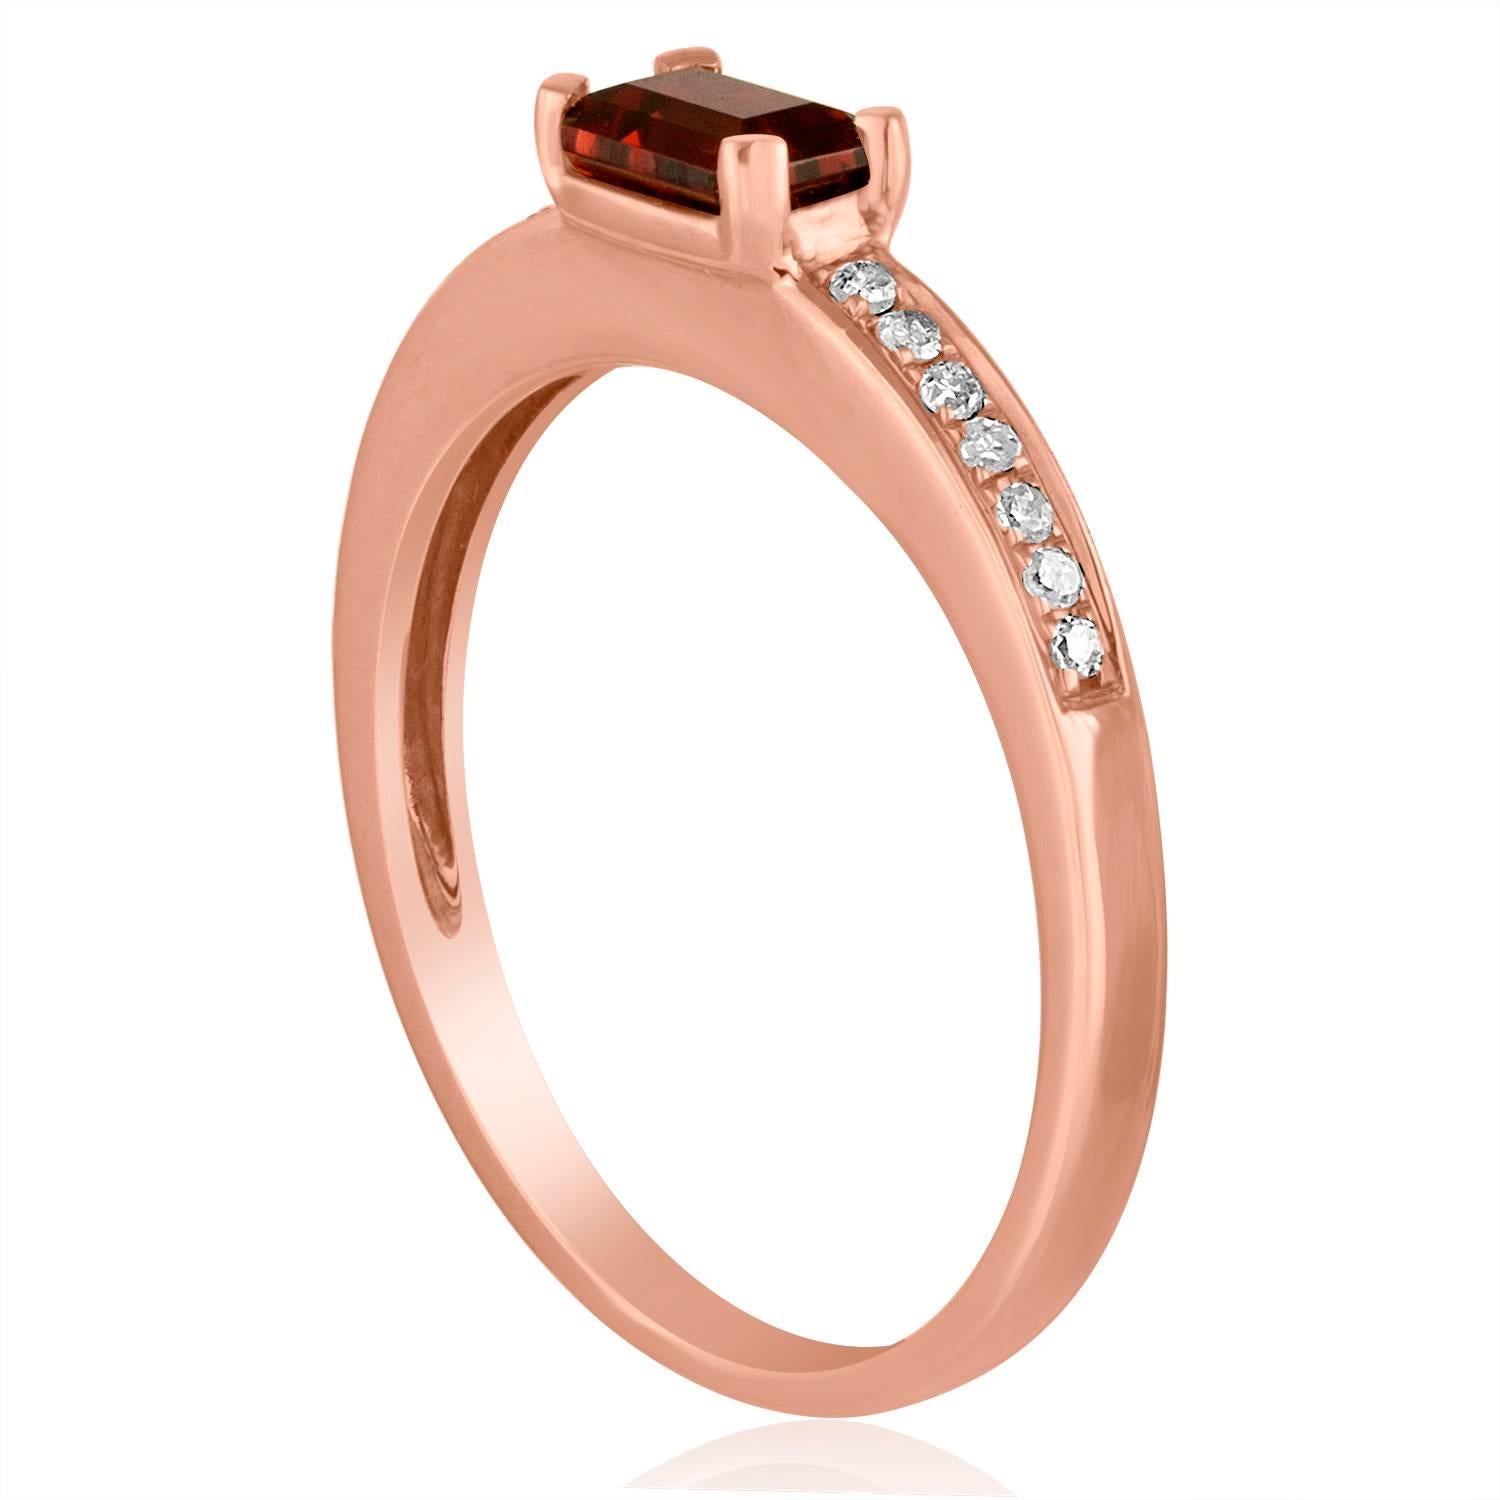 Stackable Garnet Baguette Ring
The ring is 14K Rose Gold
There are 0.08 Carats In Diamonds H SI
The Center Stone is a Garnet Baguette 0.58 Carats
The top measures 1/4